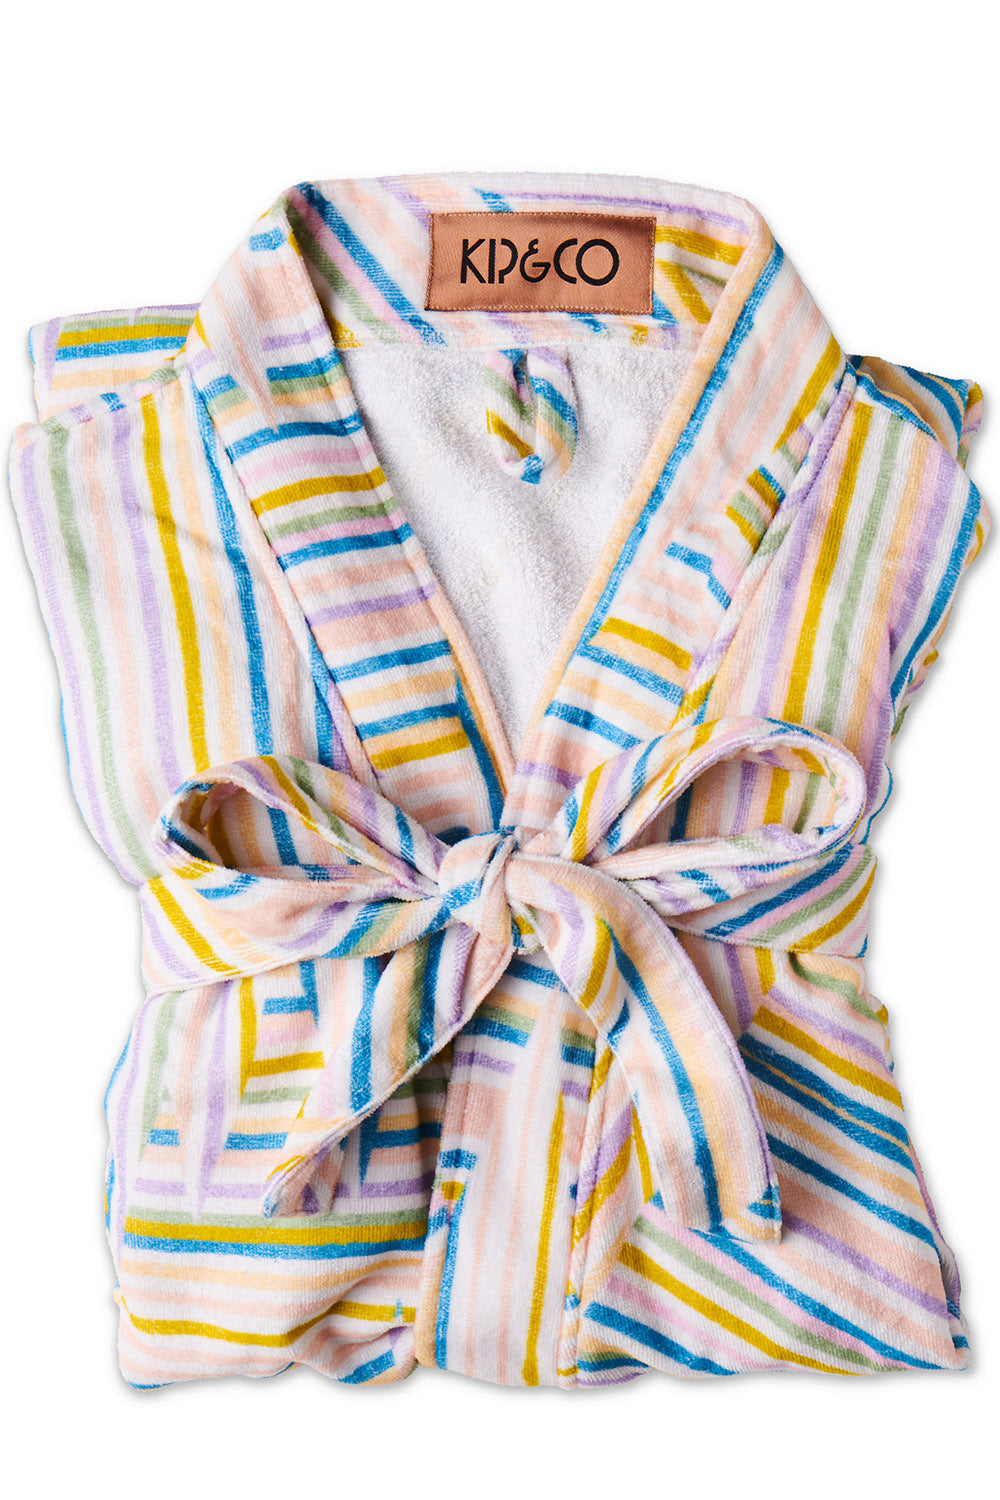 Stripes Of Parros Terry Bath Robe One Size